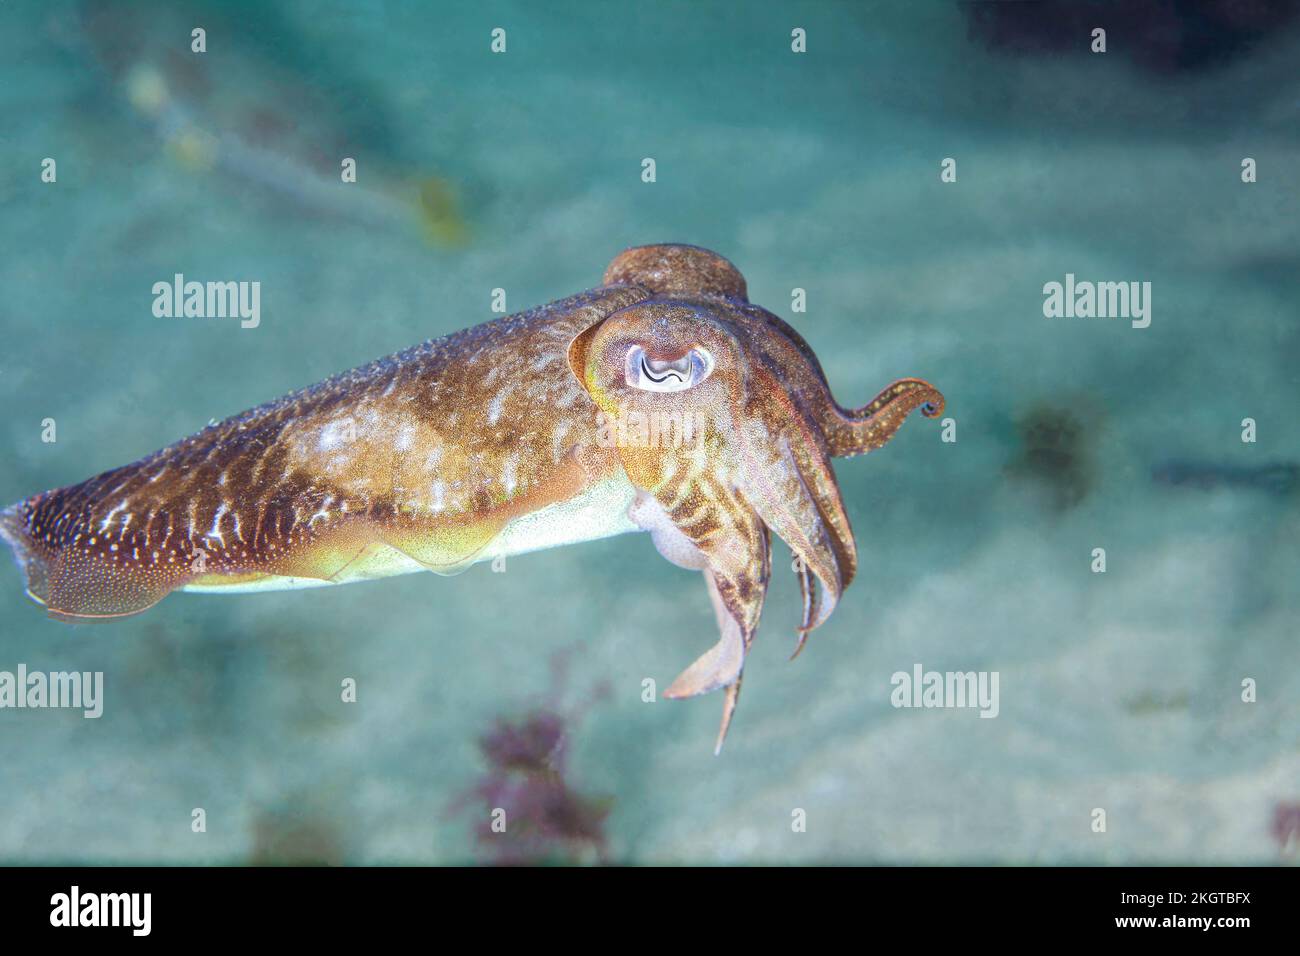 Undersea view of European common cuttlefish (Sepia officinalis) Stock Photo